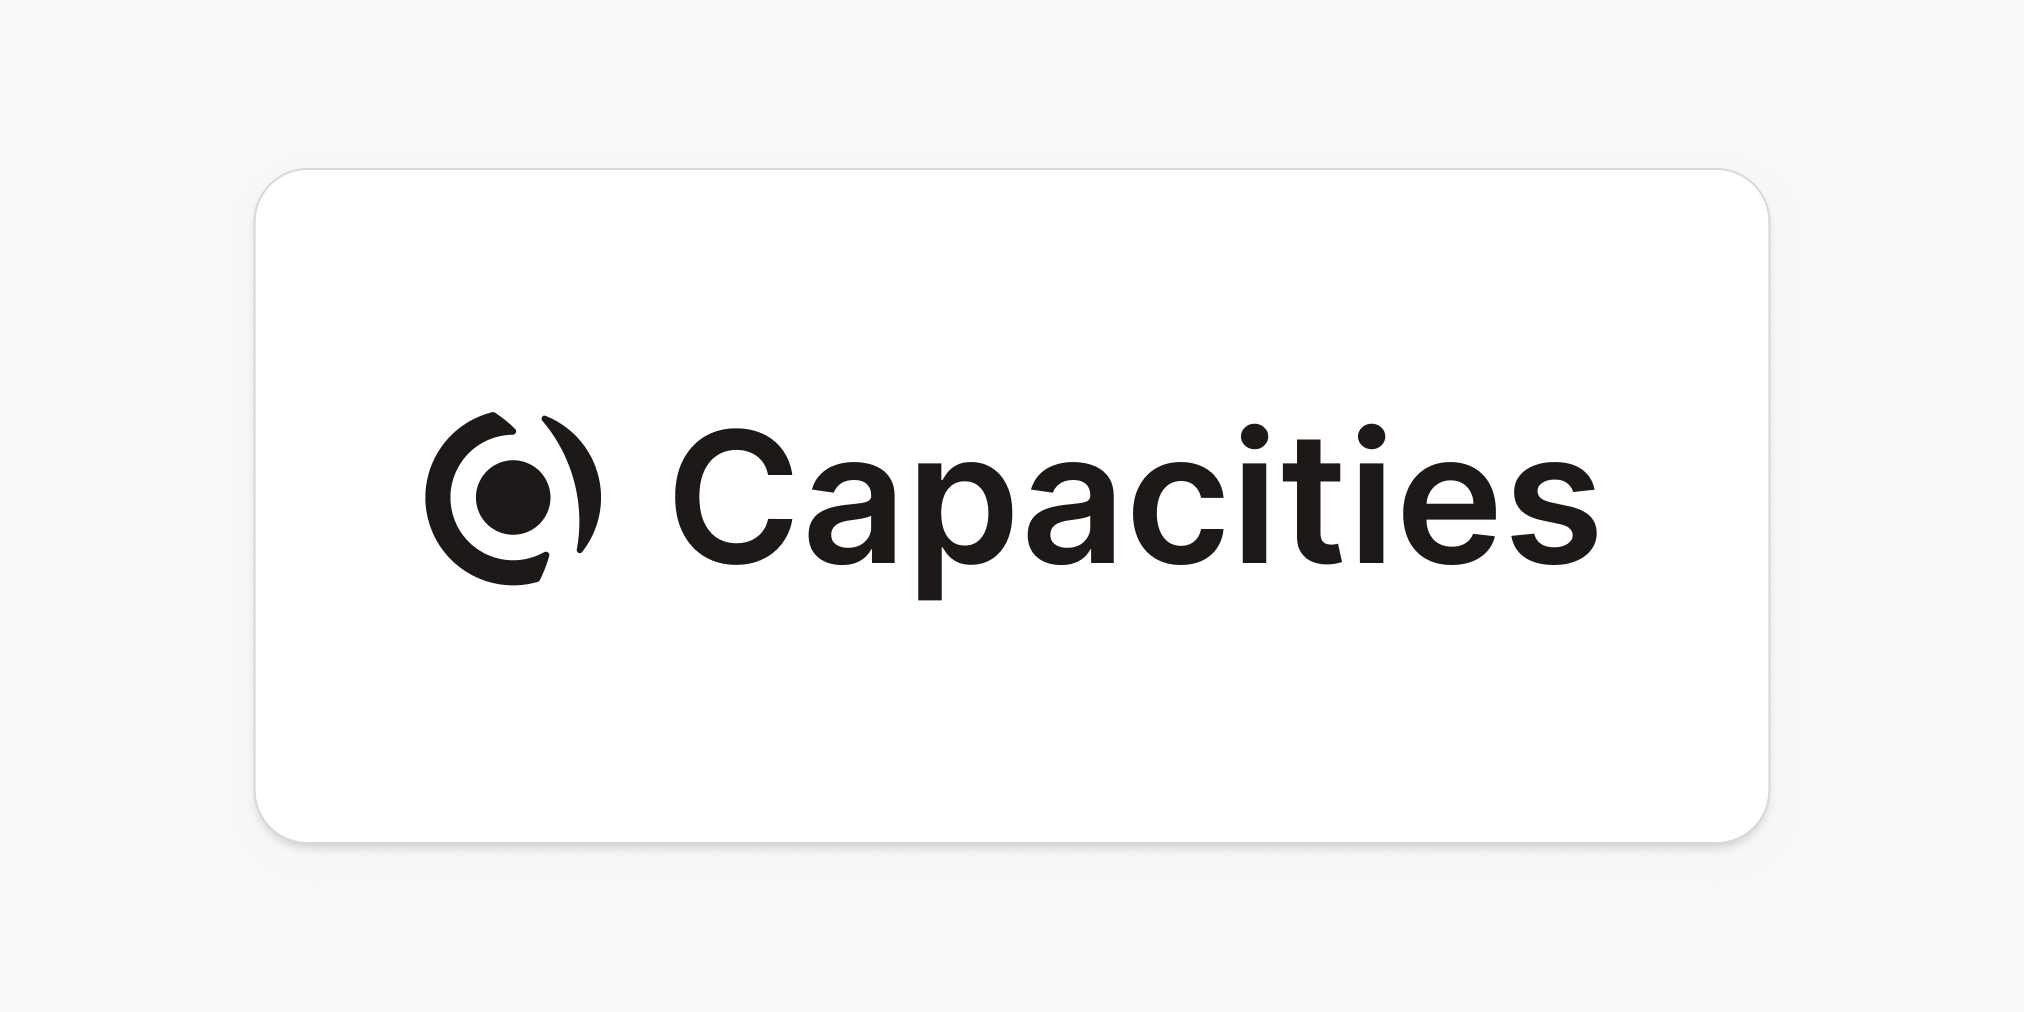 Why the name "Capacities"